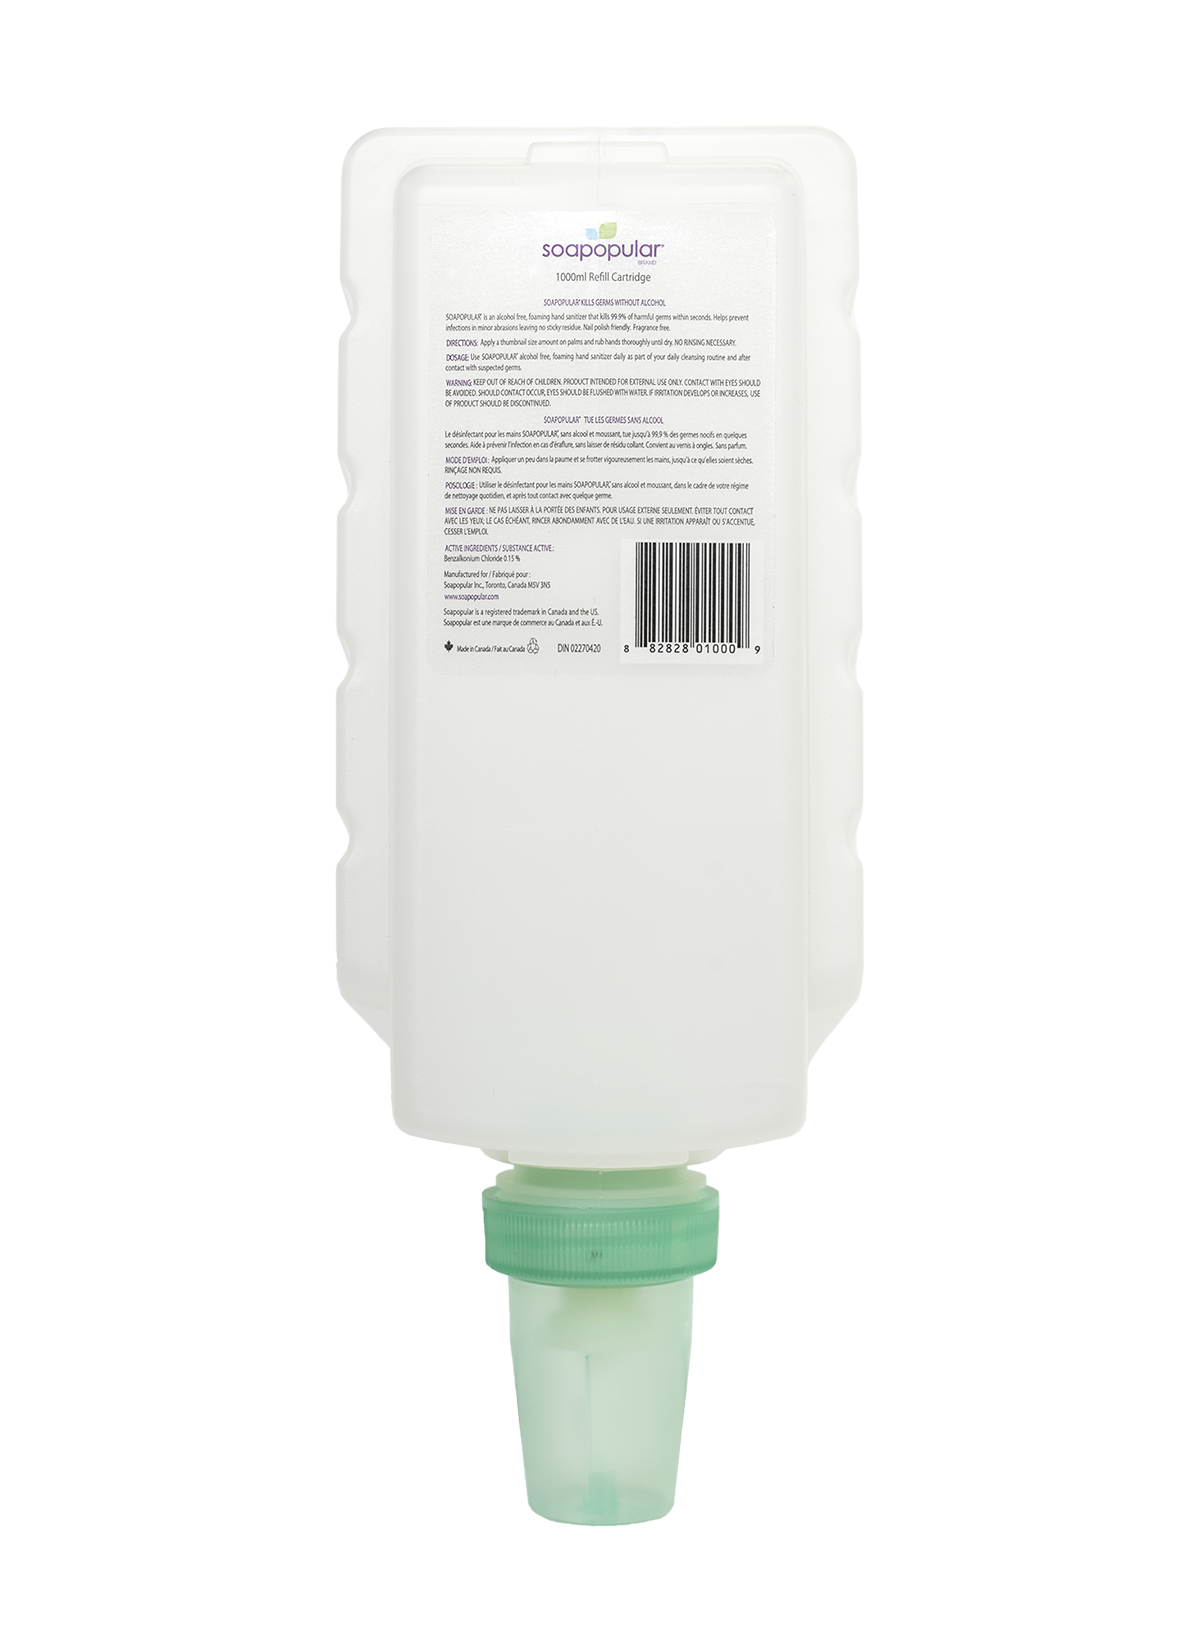 Soapopular alcohol free 1000mL cartridge refill can be used to refill manual dispensers.